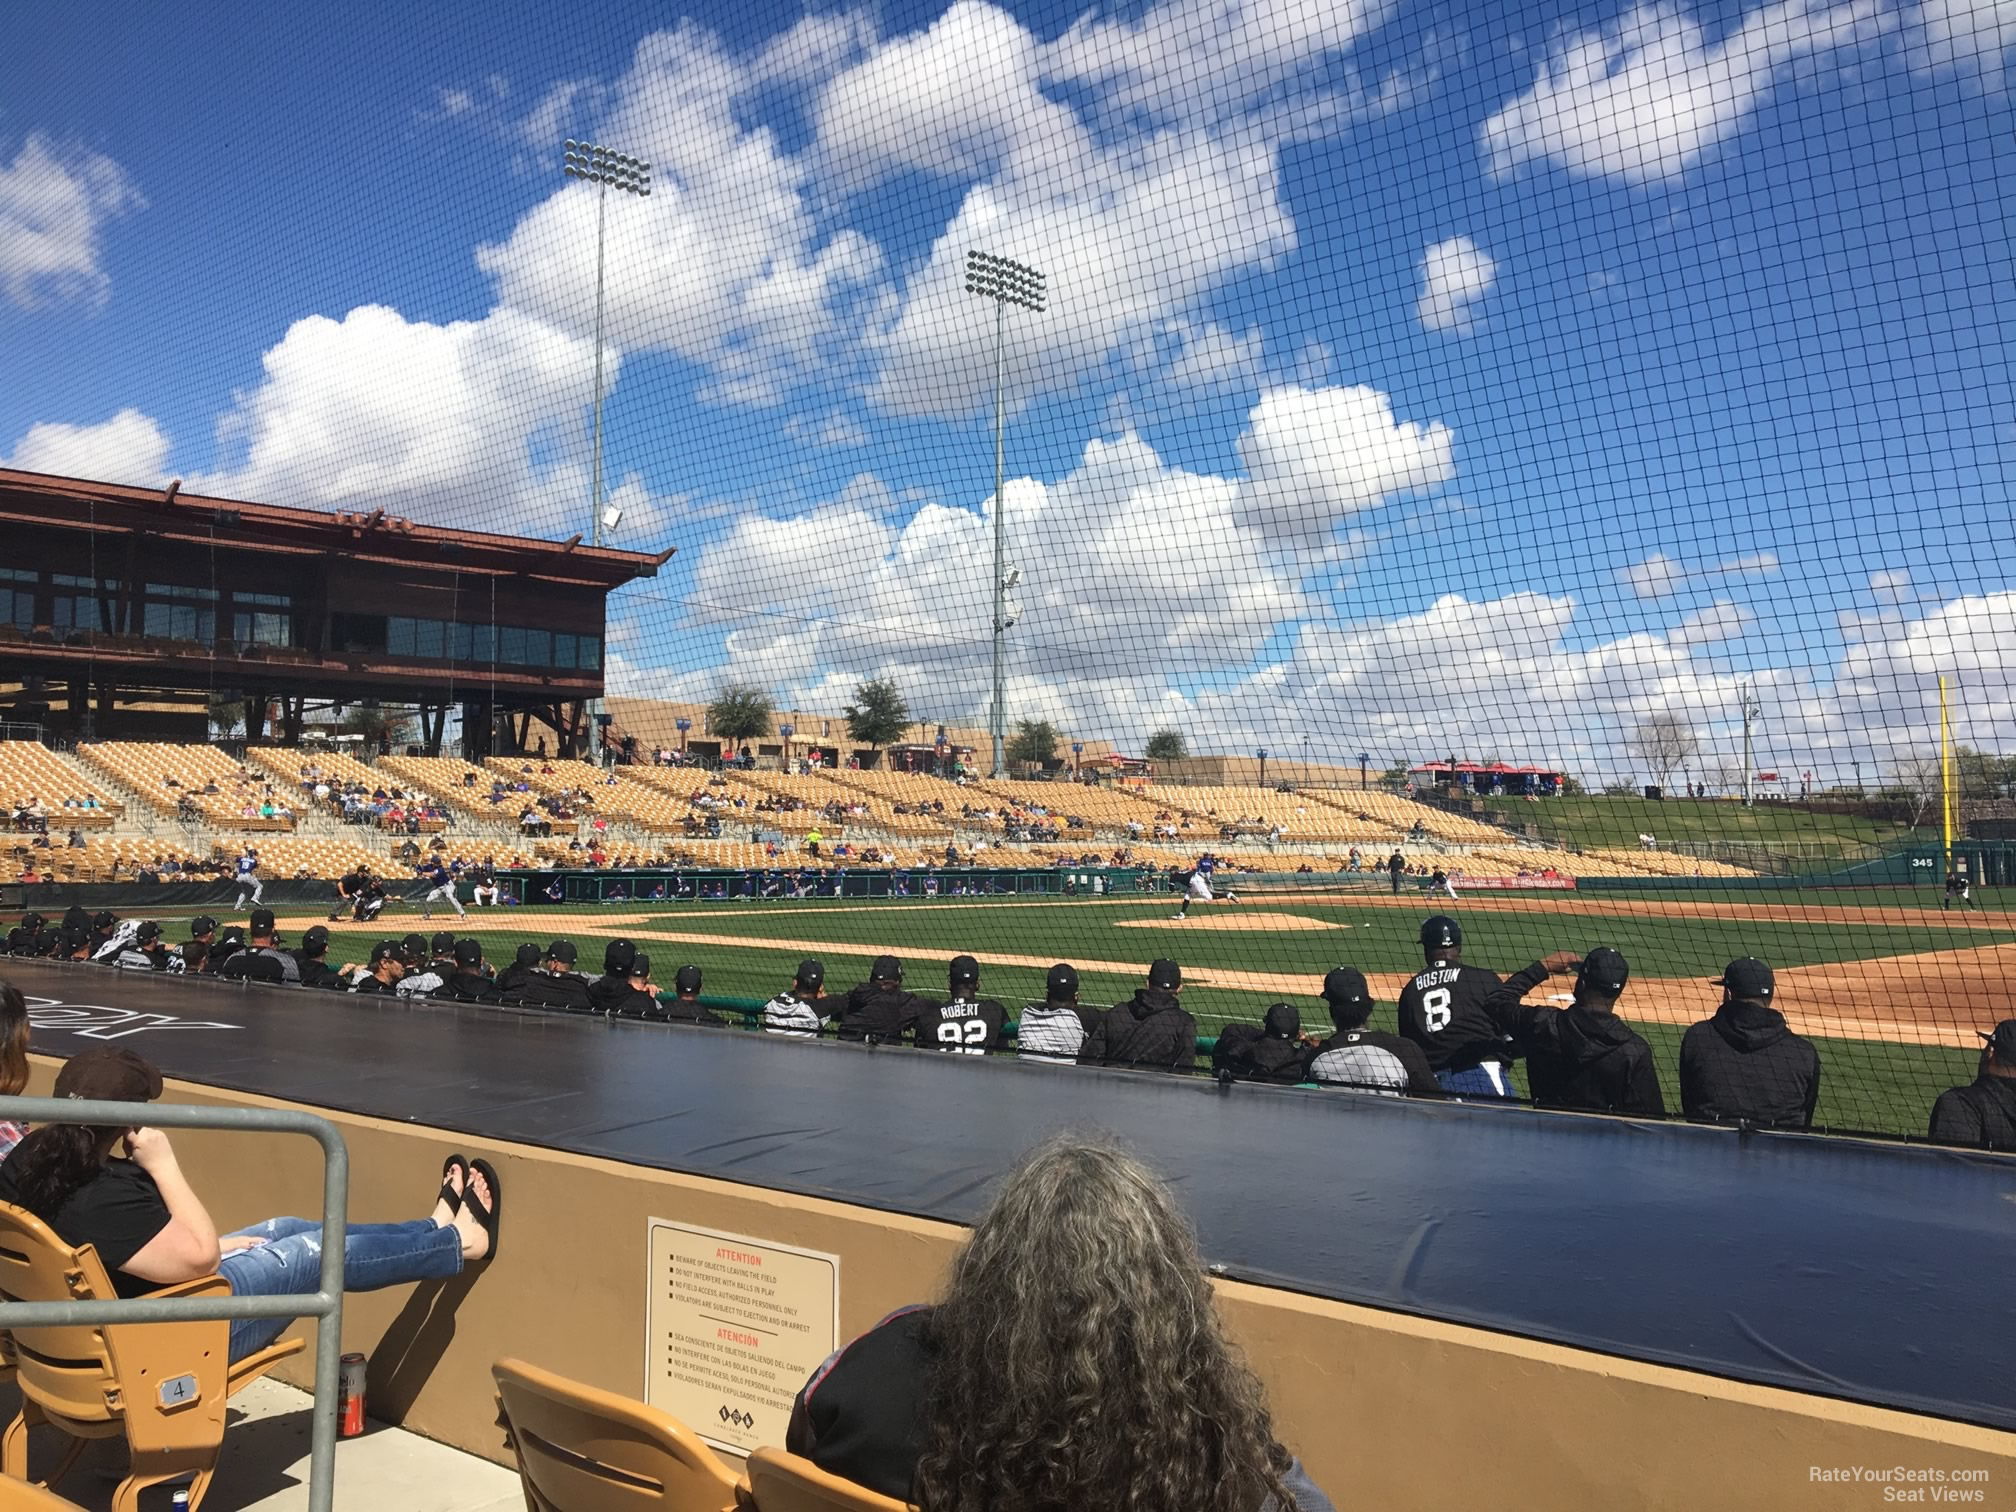 section 6, row 6 seat view  - camelback ranch